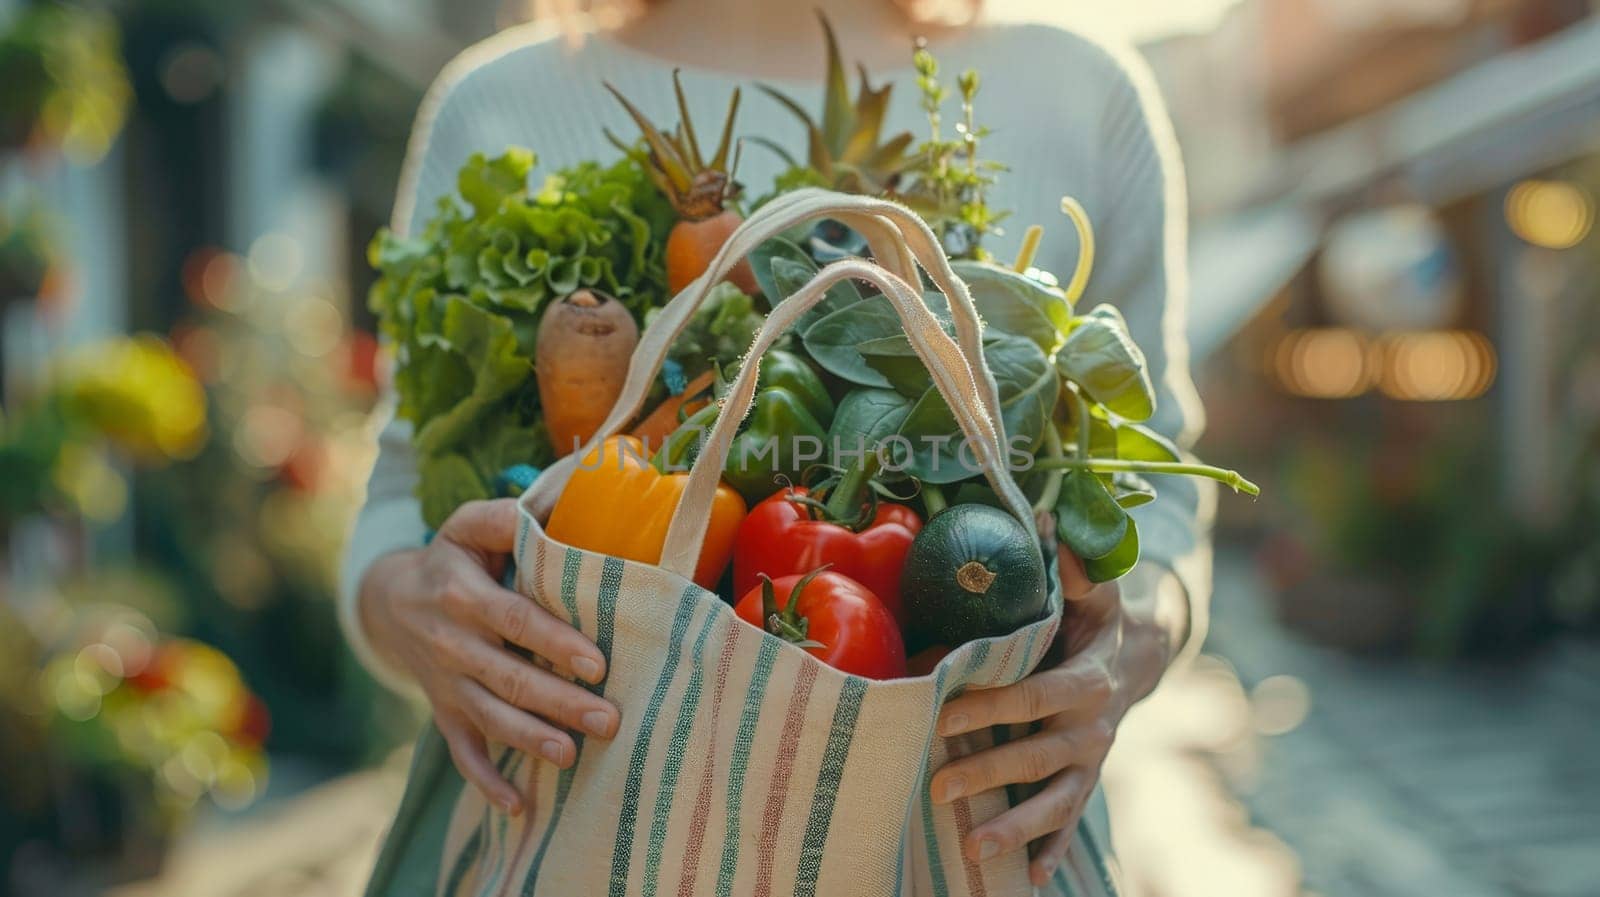 A close-up of hands holding a reusable shopping bag with fresh vegetables in it.